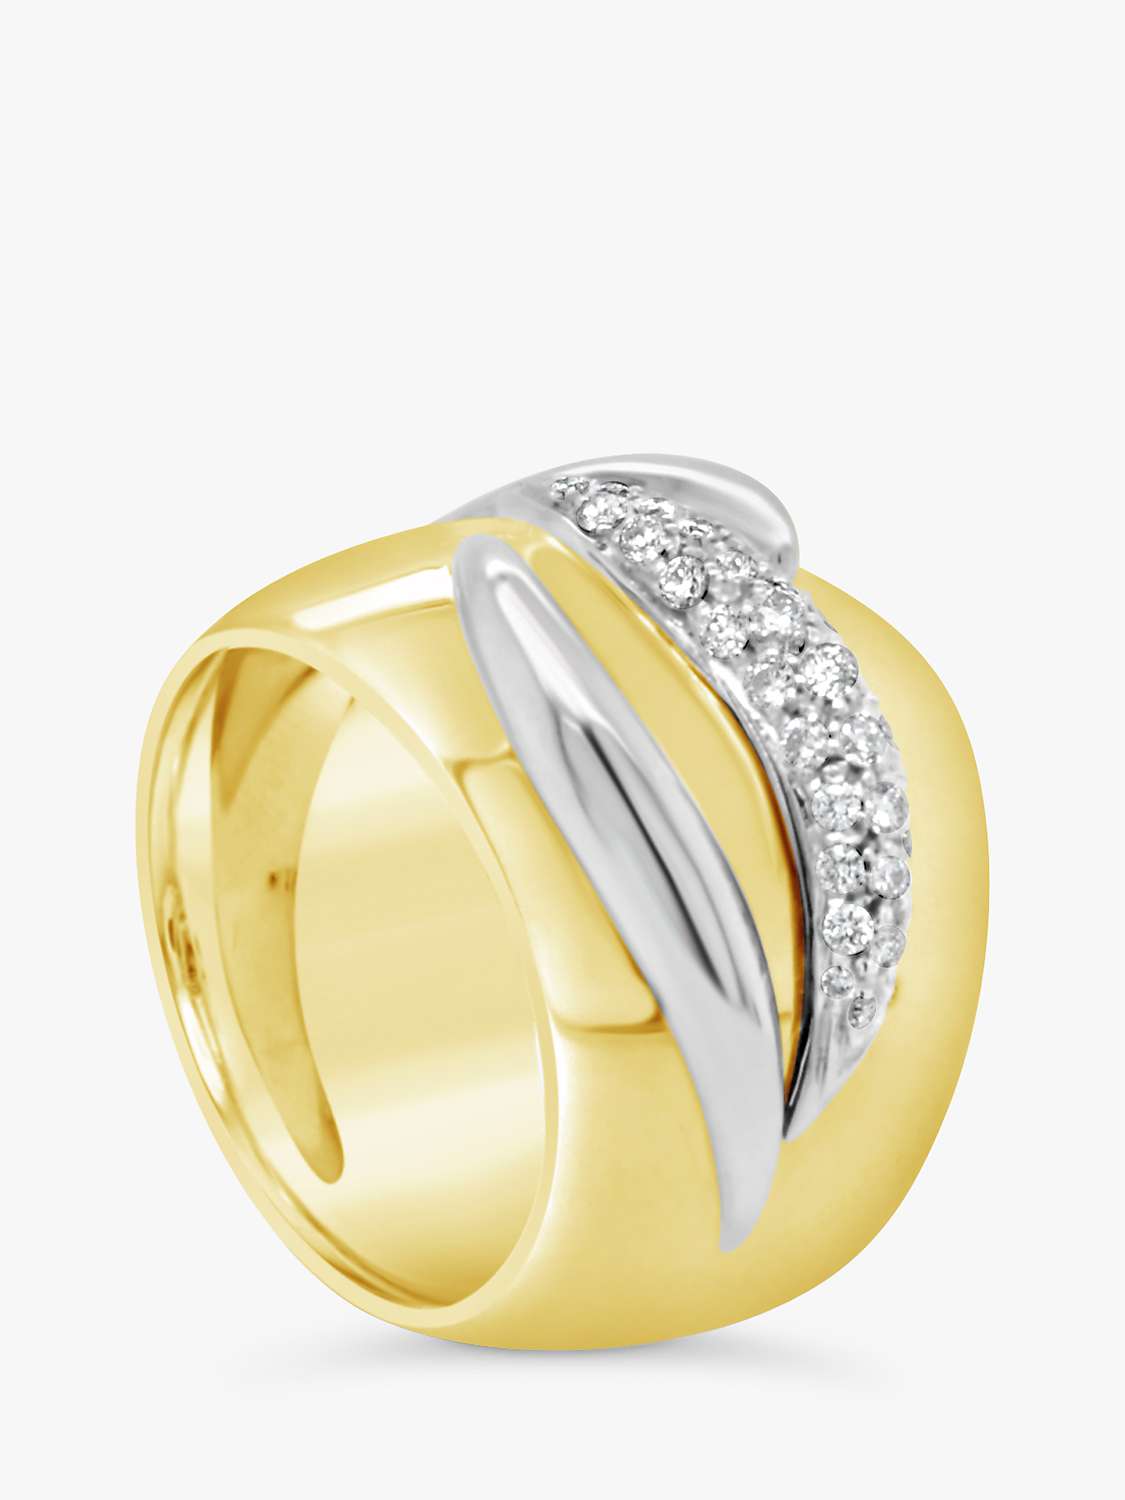 Buy Milton & Humble Jewellery Second Hand Wempe 18ct White & Yellow Gold Diamond Chunky Band Ring Online at johnlewis.com